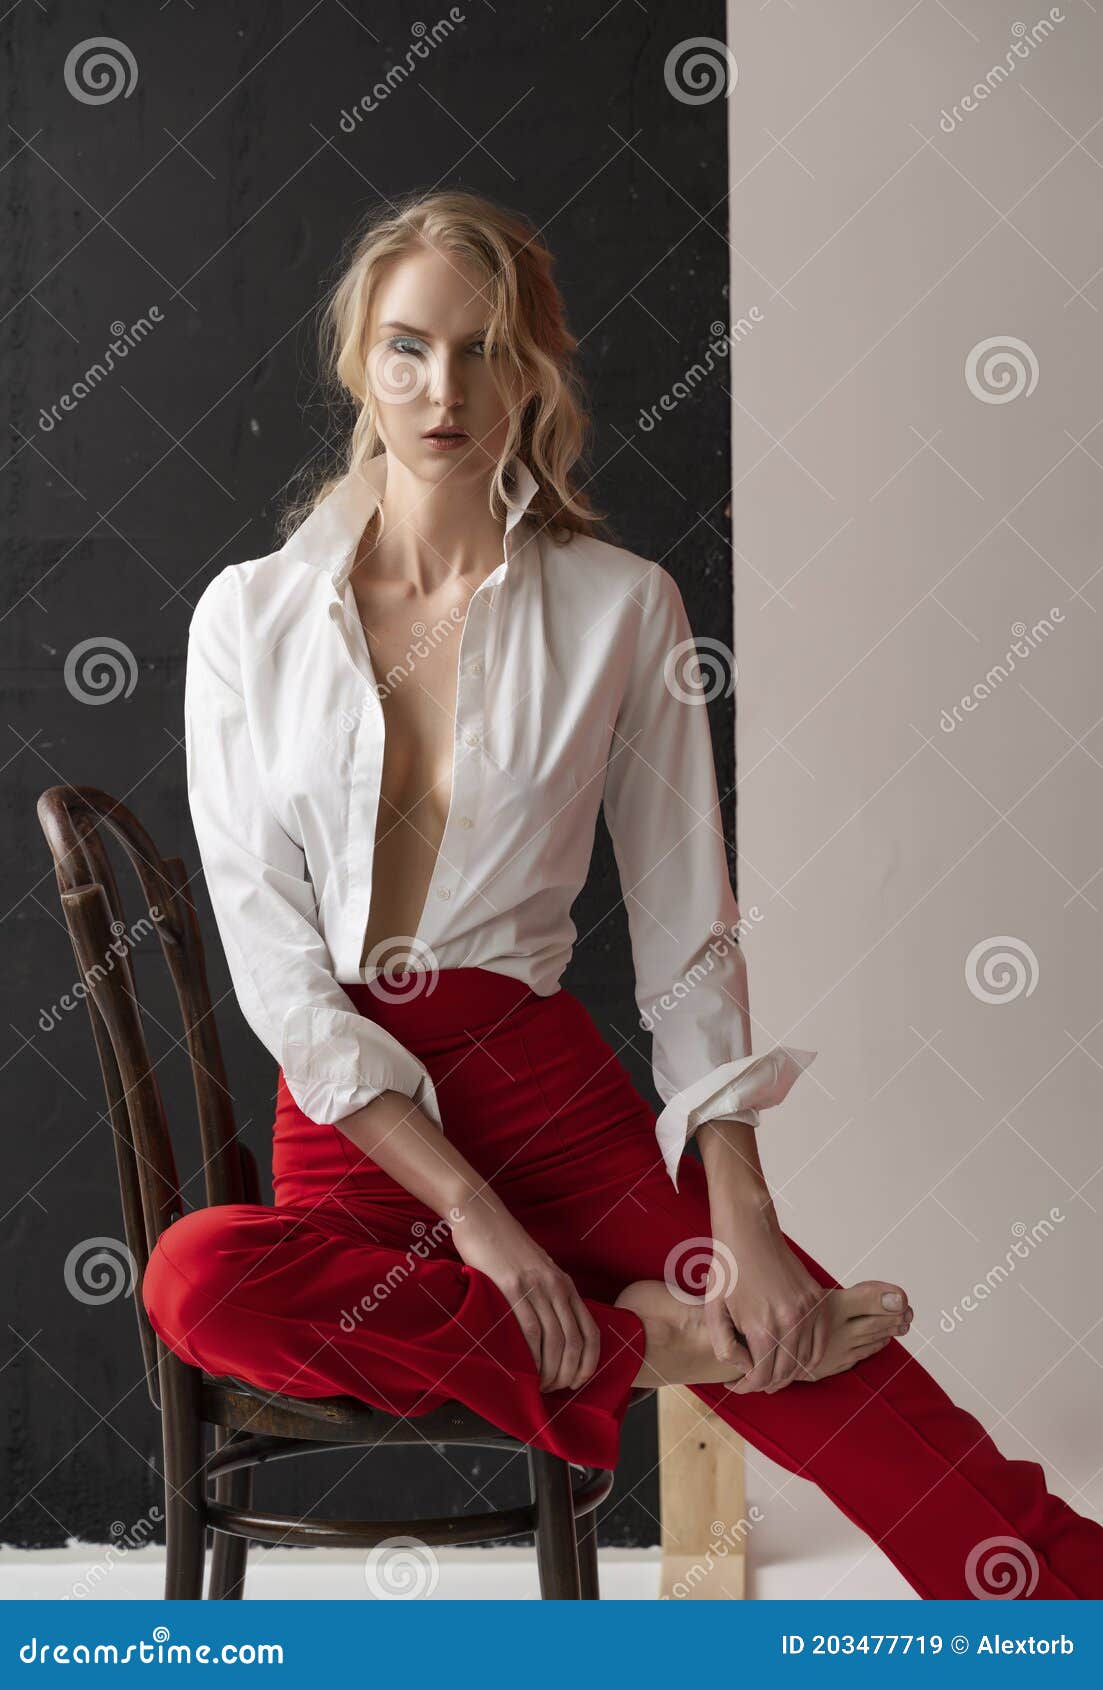 A Beautiful Blonde Curly Girl Wearing A Red Pants And A Blouse Unbuttoned On Her Braless Big